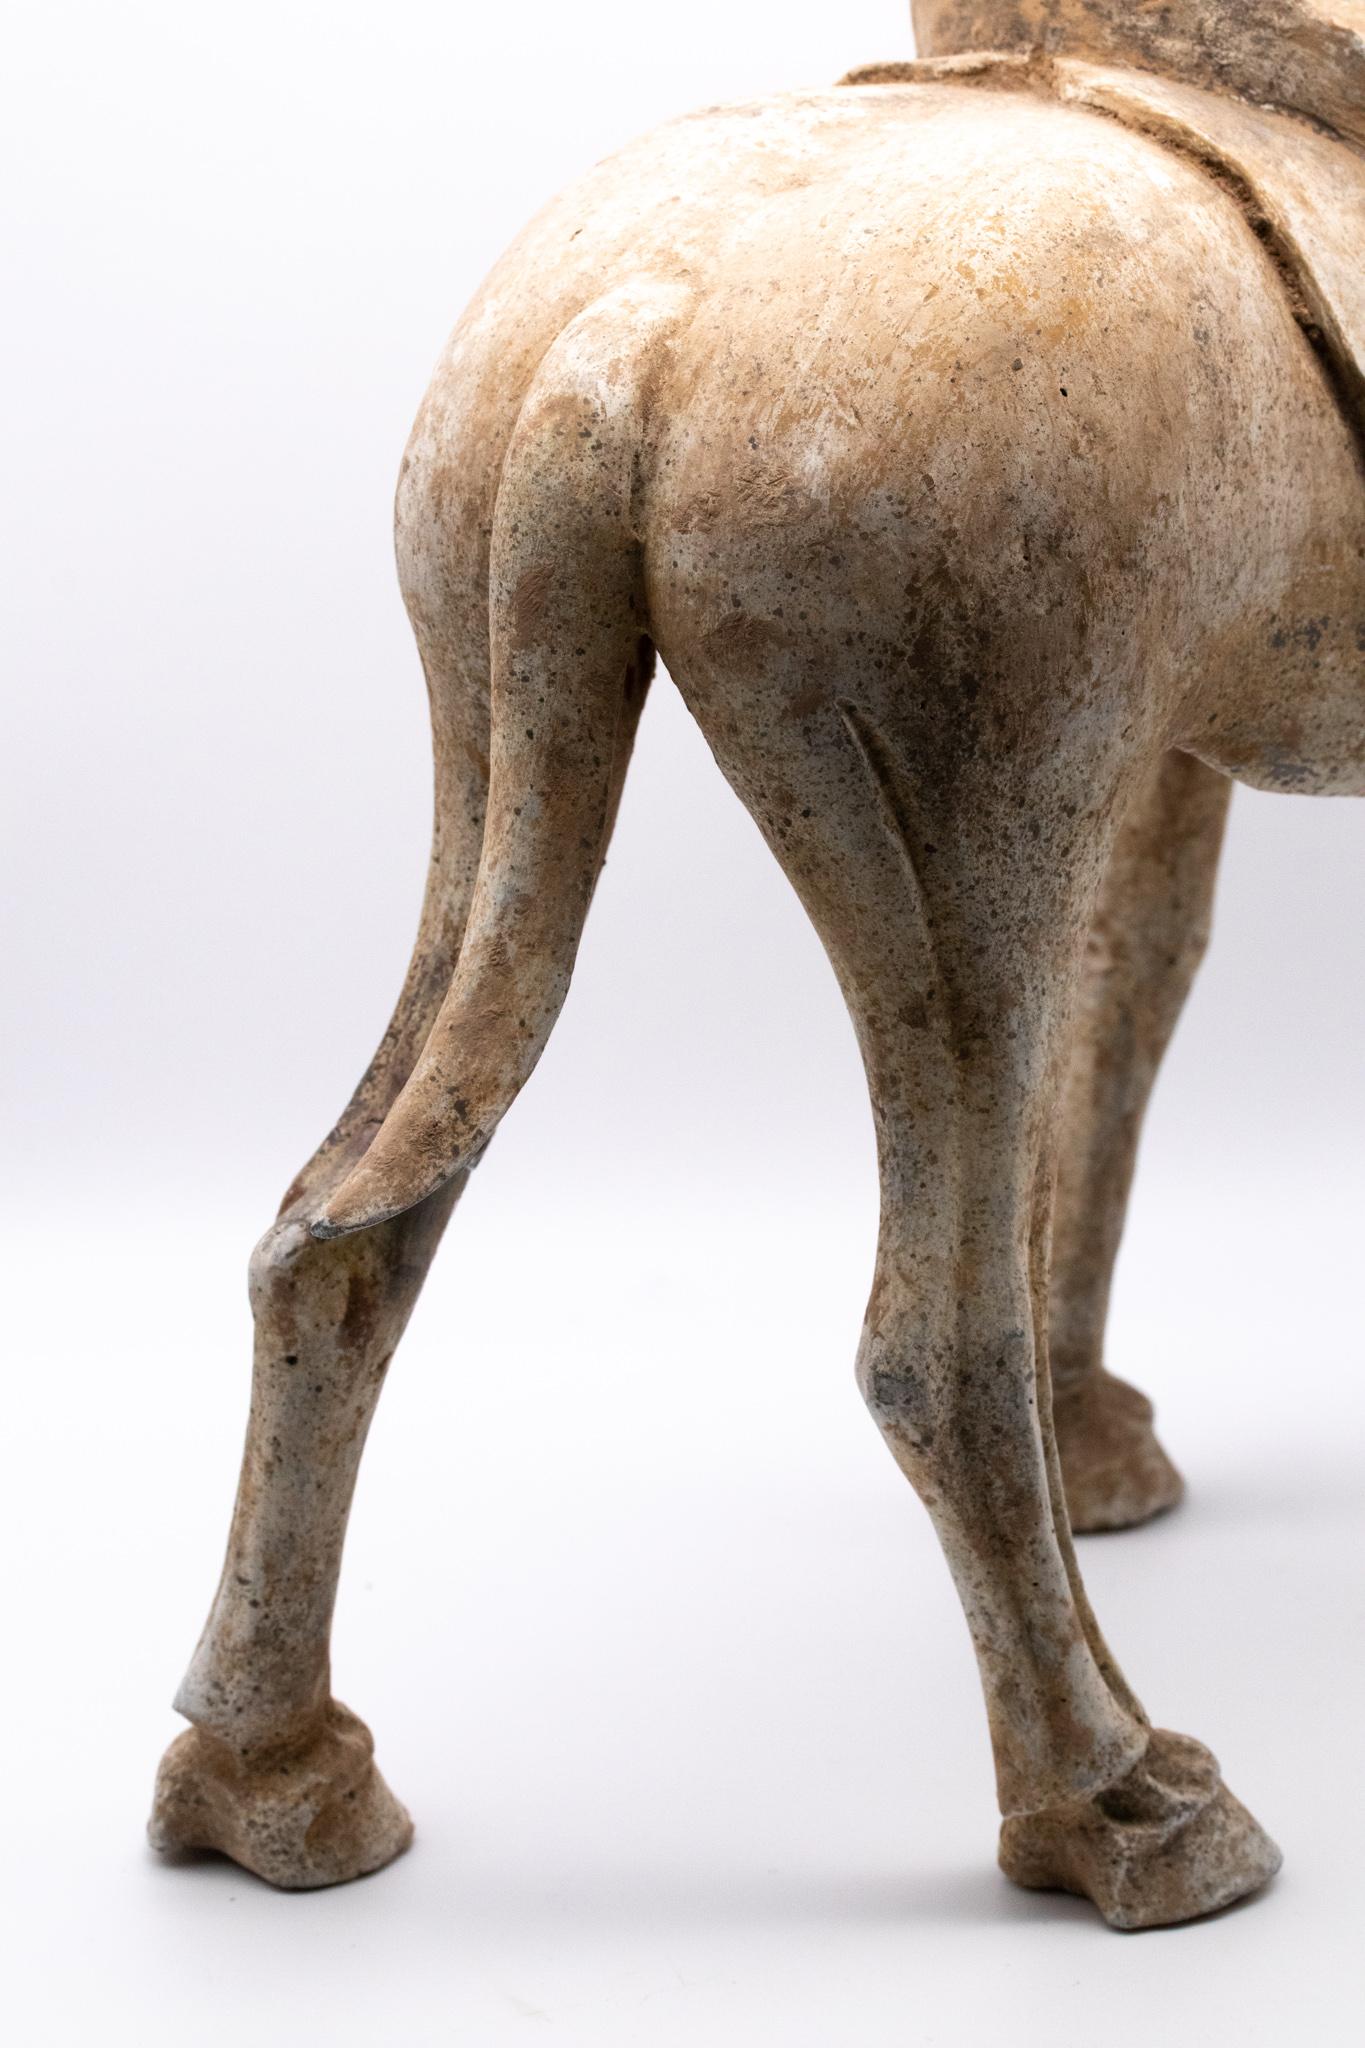 18th Century and Earlier China 618-907 Ad Tang Dynasty Ancient Earthenware Sculpture of a Walking Horse For Sale